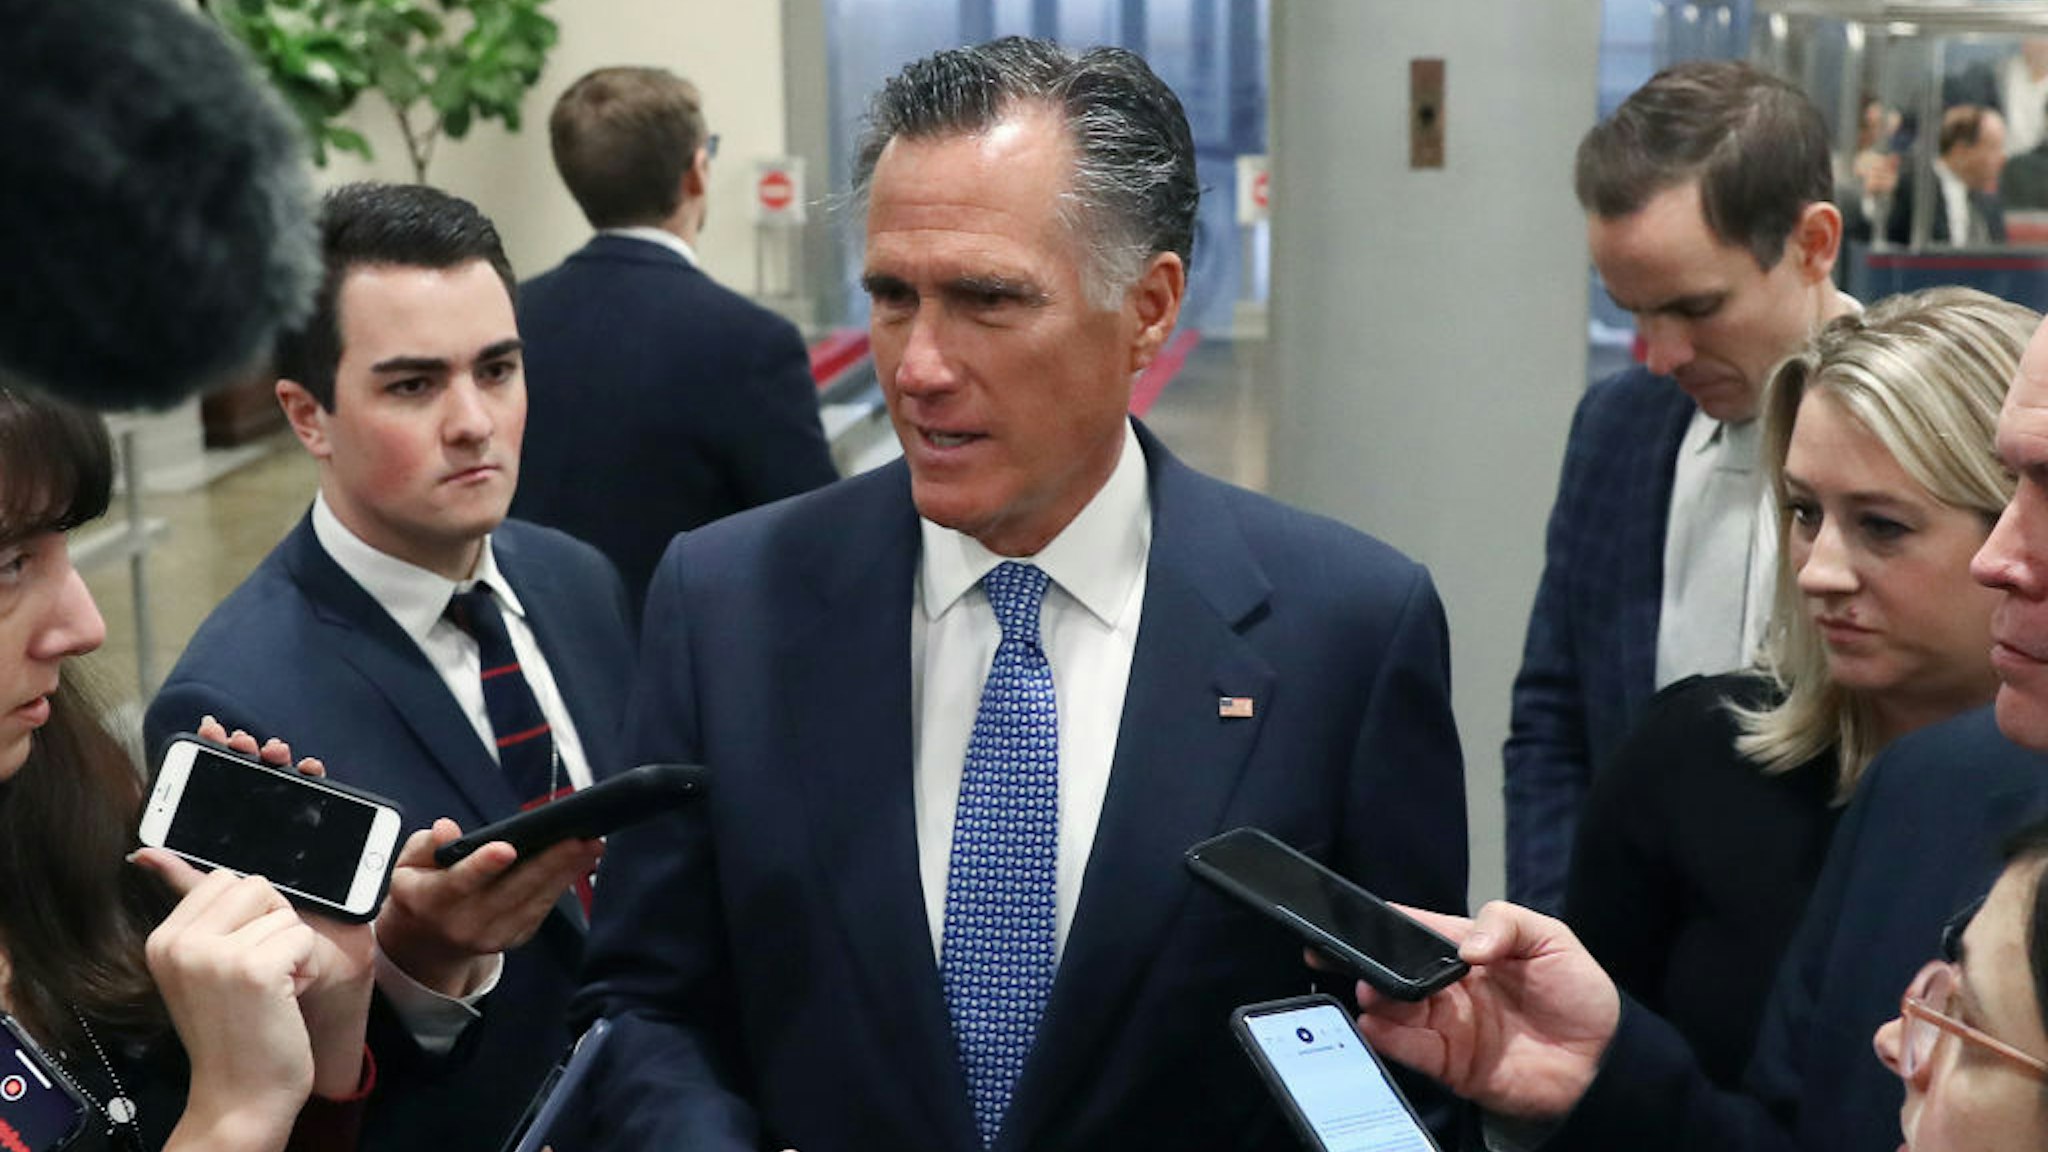 Sen. Mitt Romney (R-UT) talks to reporters at the U.S. Capitol January 21, 2020 in Washington, DC. Today marks day one of the Senate impeachment trial against President Trump. (Photo by Mark Wilson/Getty Images)